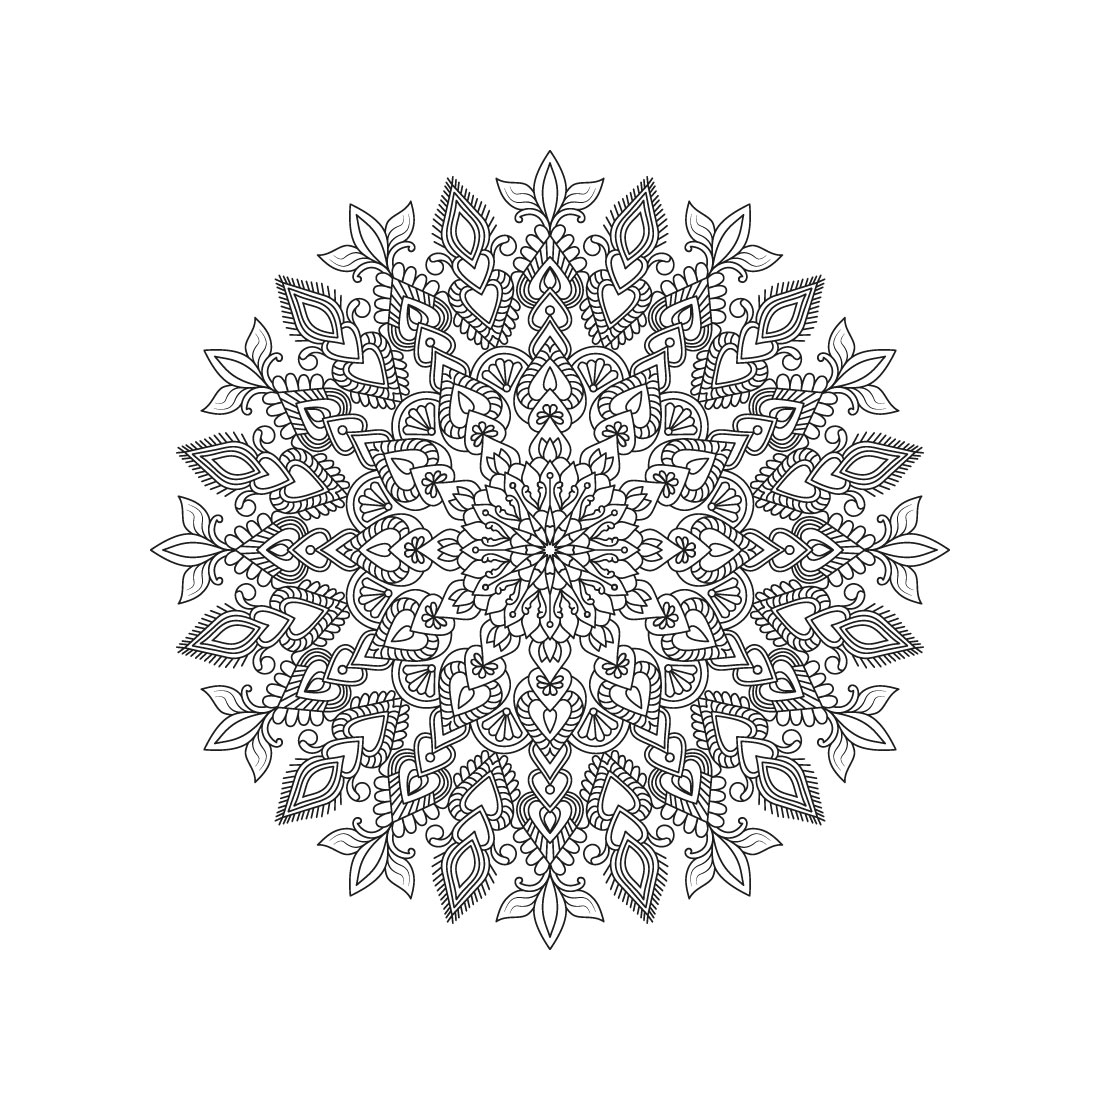 Bundle of 10 Cosmic Delight Mandala Coloring Book Pages preview image.